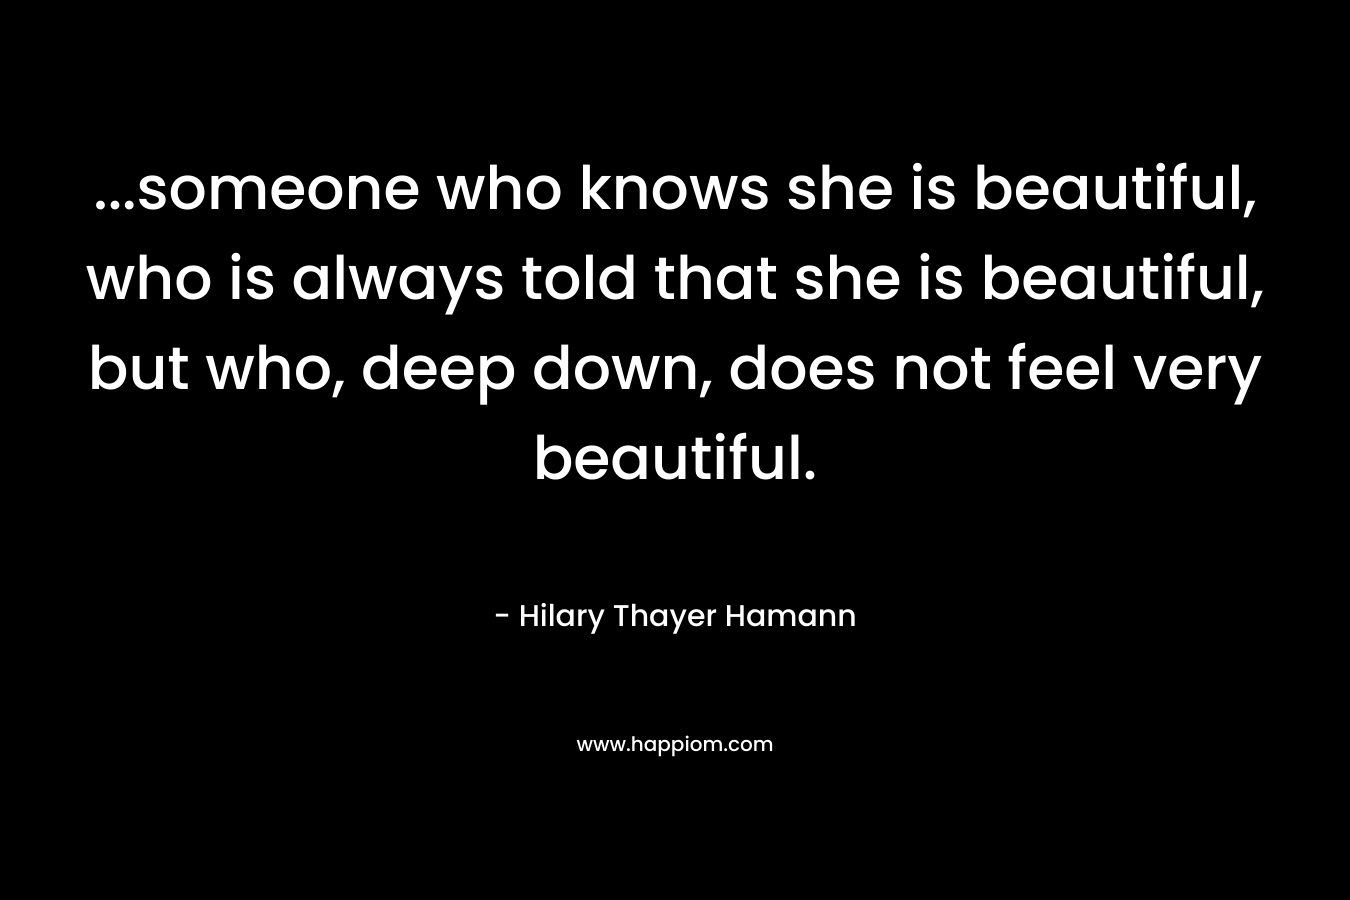 ...someone who knows she is beautiful, who is always told that she is beautiful, but who, deep down, does not feel very beautiful.